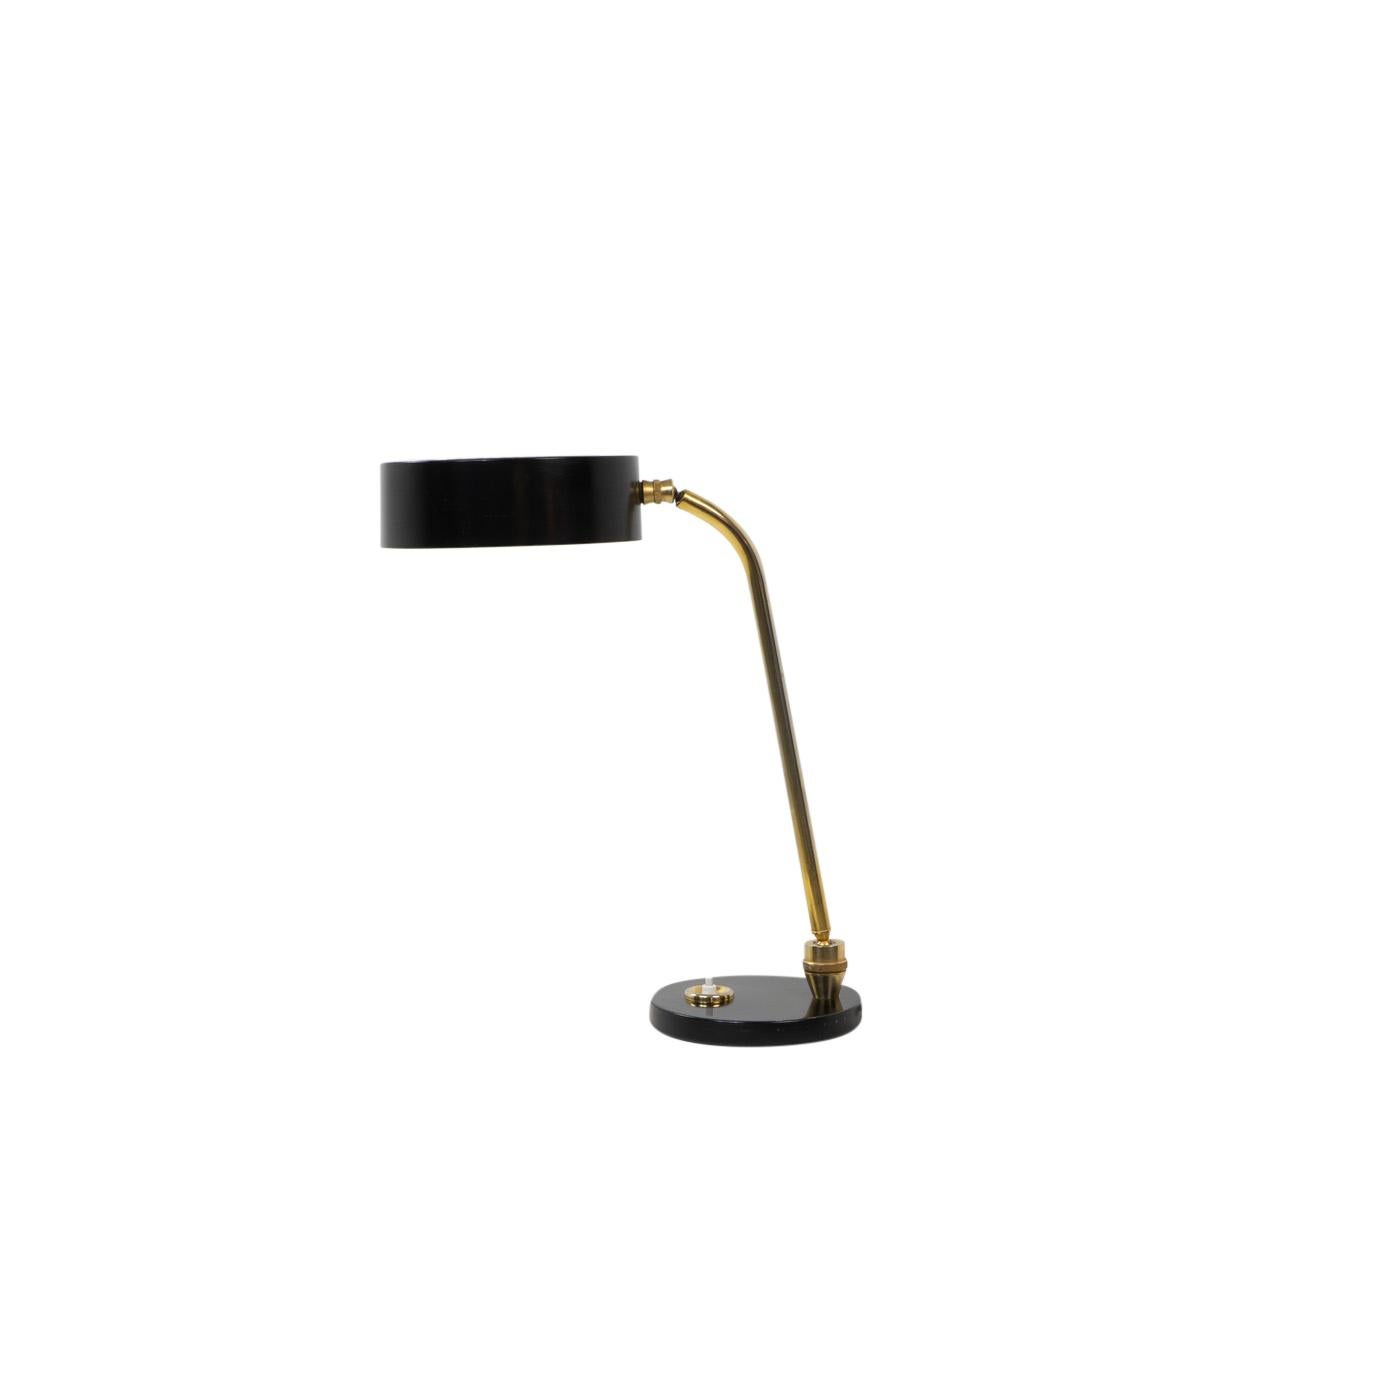 The Charlotte Perriand Jumo desk lamp is a remarkable piece by the iconic designer Charlotte Perriand. Created in collaboration with the renowned French lighting brand Jumo, this desk lamp combines Perriand's modernist aesthetics with Jumo's